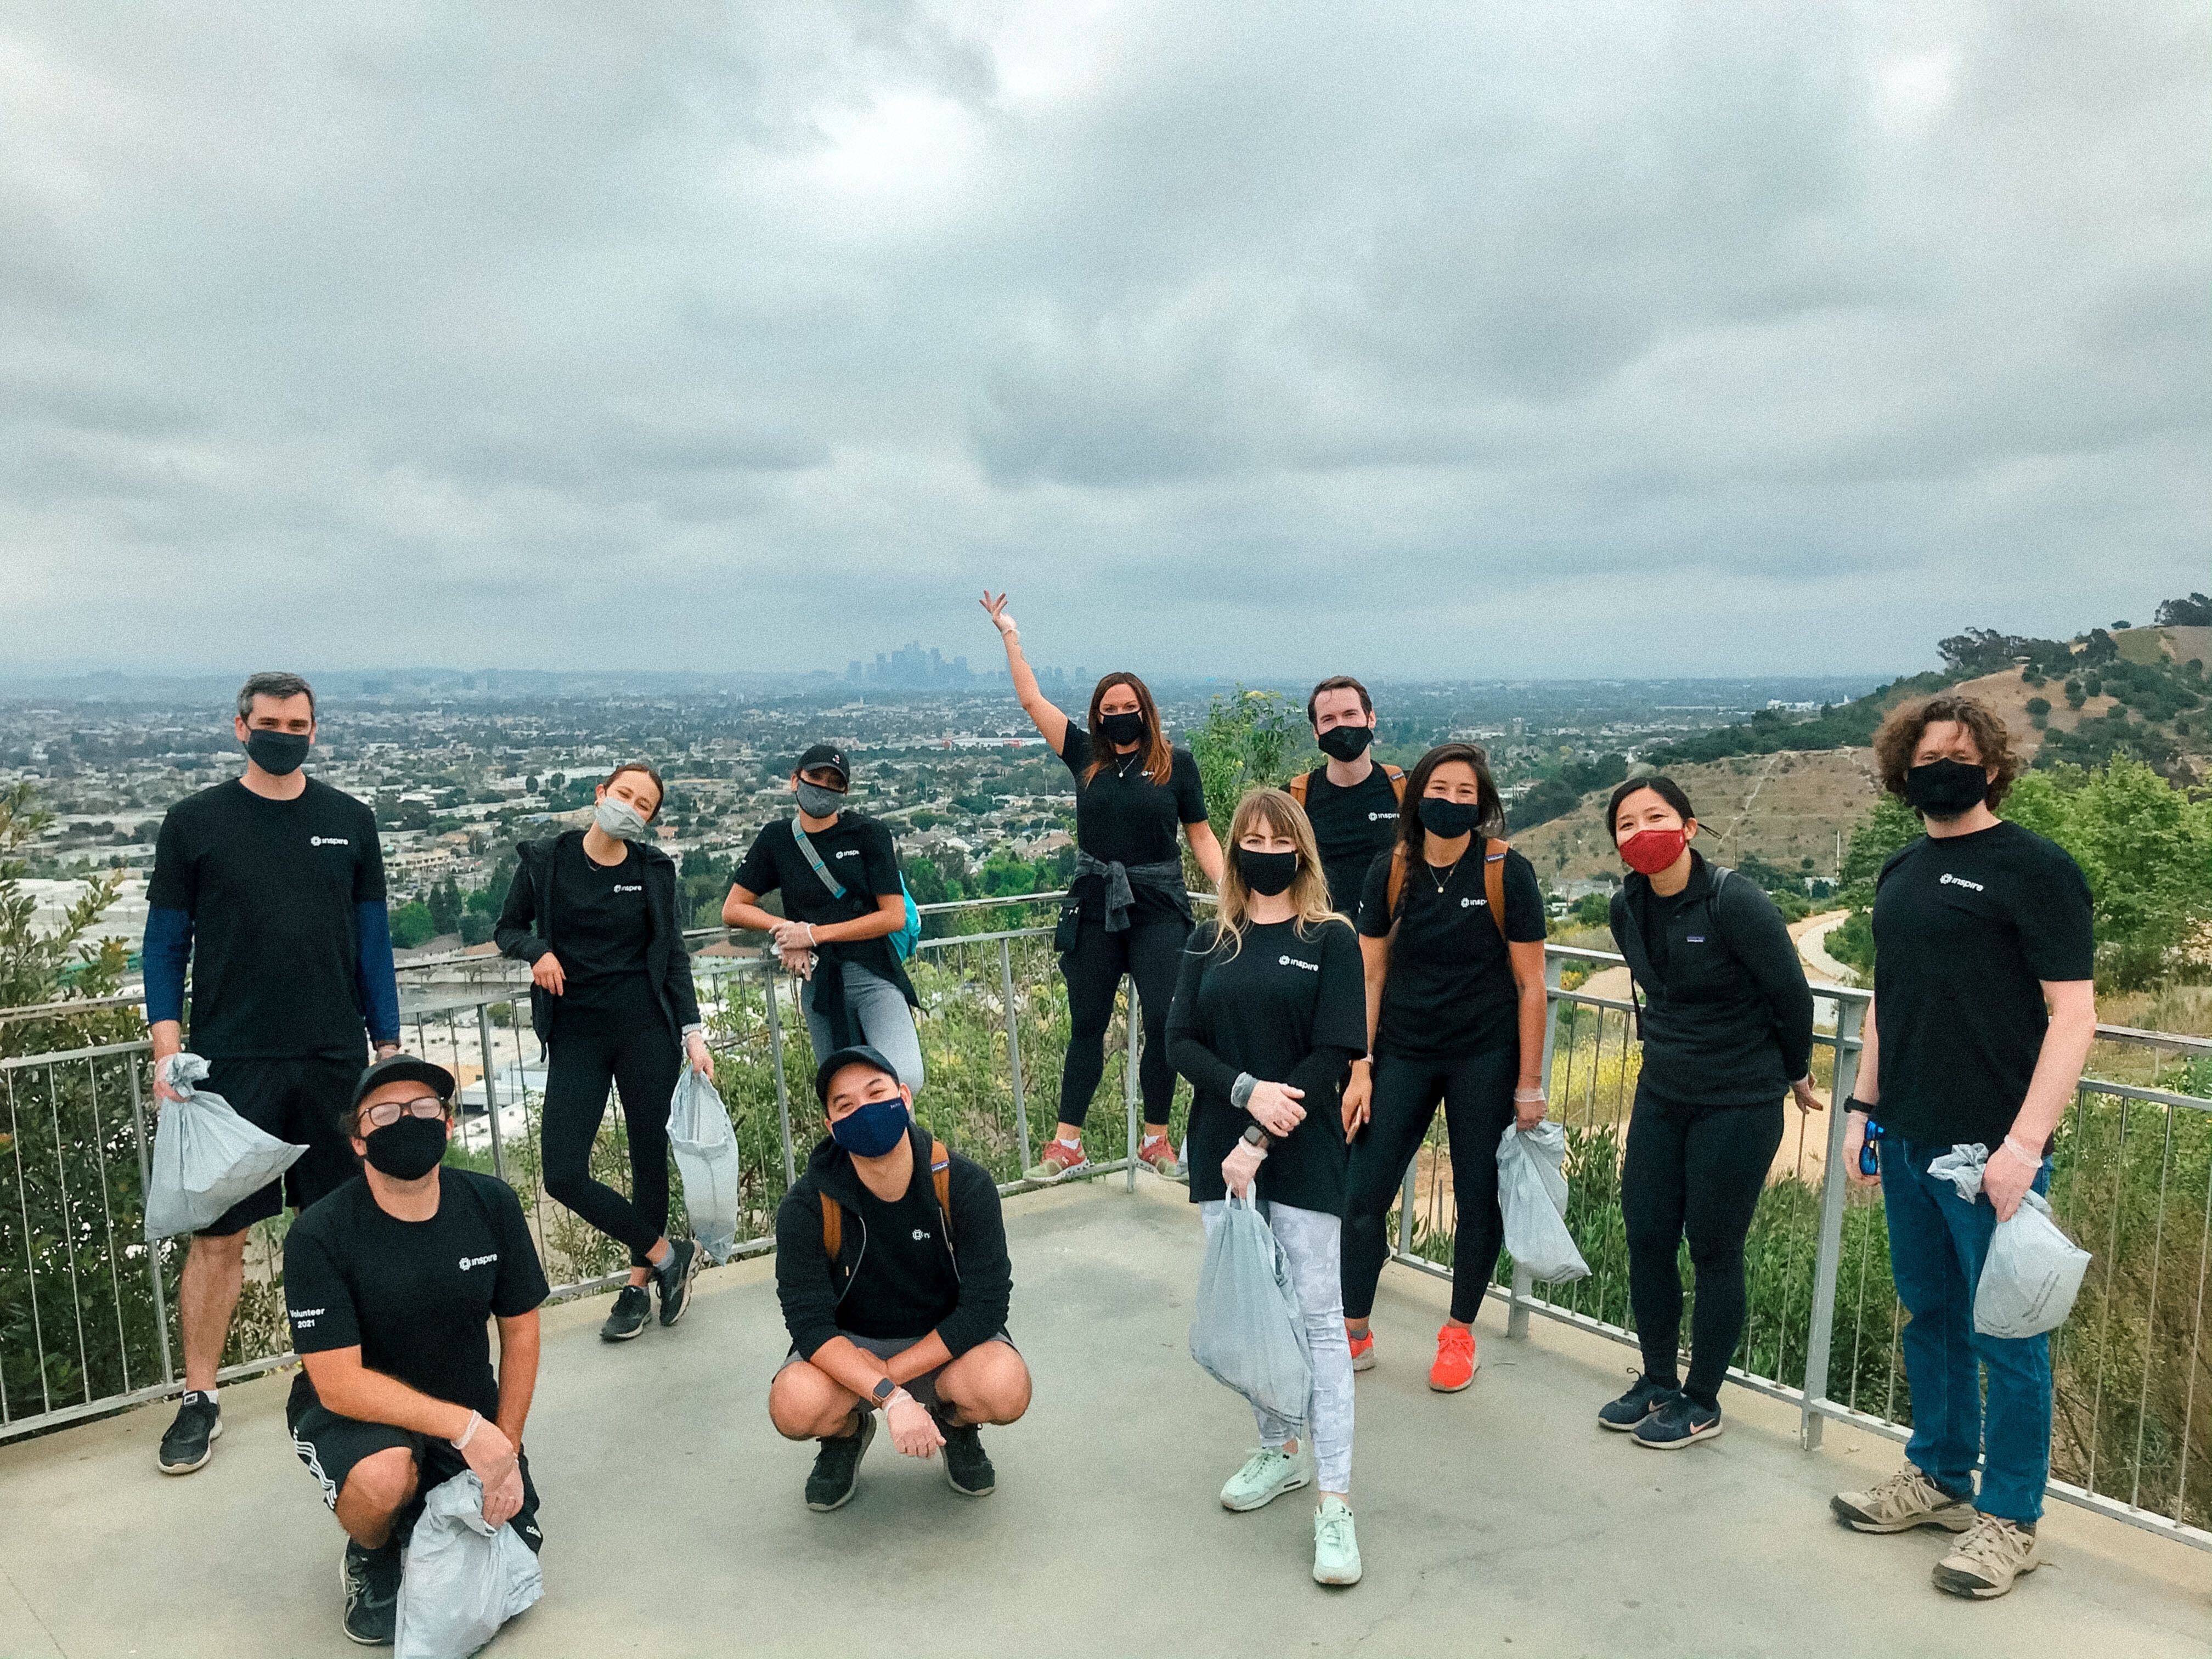 Inspire's employees, masked and wearing T-shirts with "Inspire" on the front, standing on a balcony overlooking a plain.